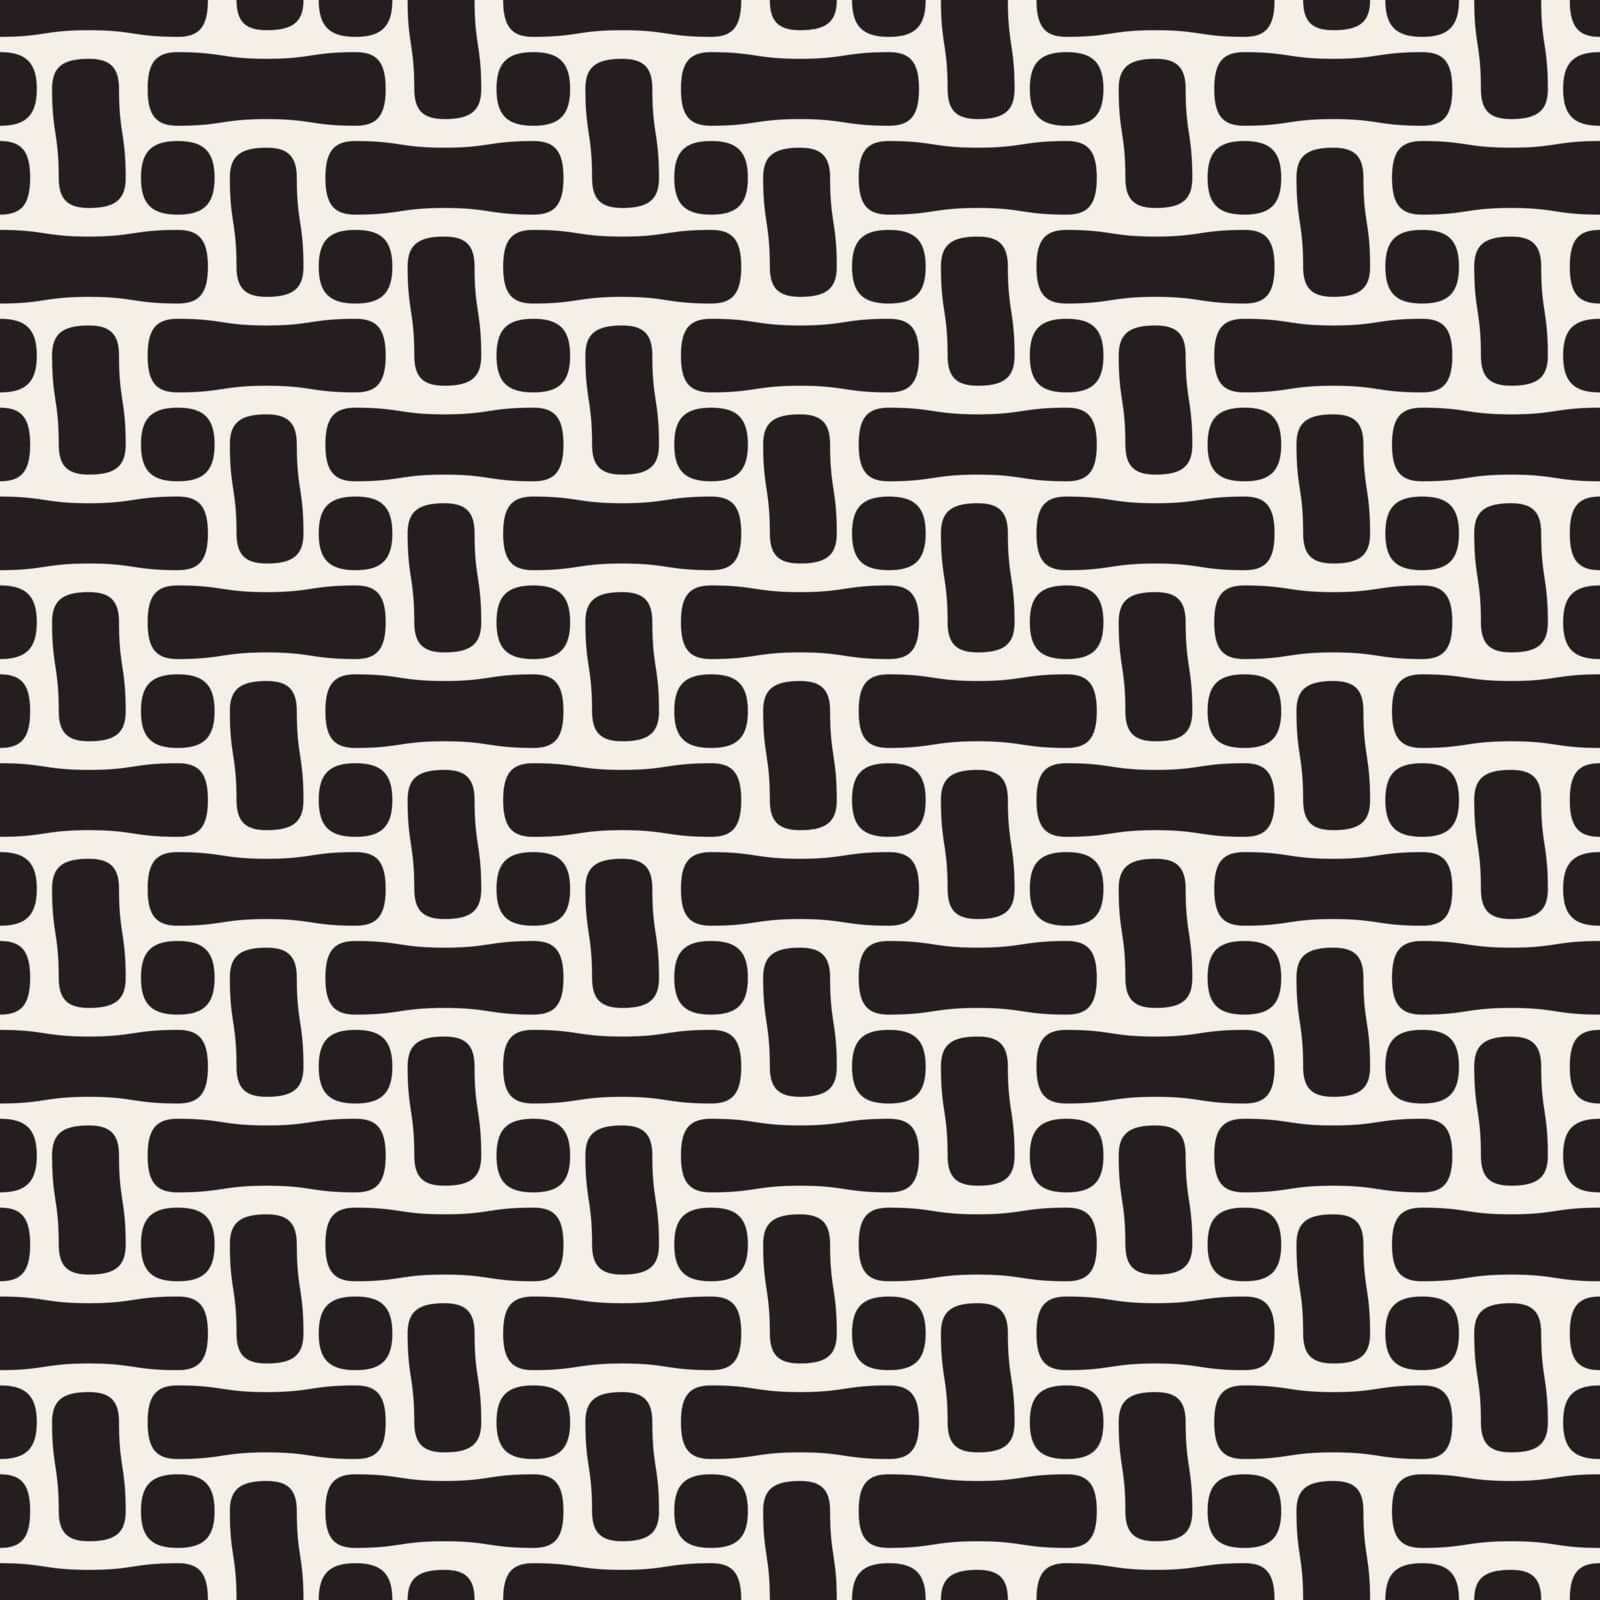 Vector Seamless Black And White Rounded Rectangles Pattern. Abstract Geometric Background Design